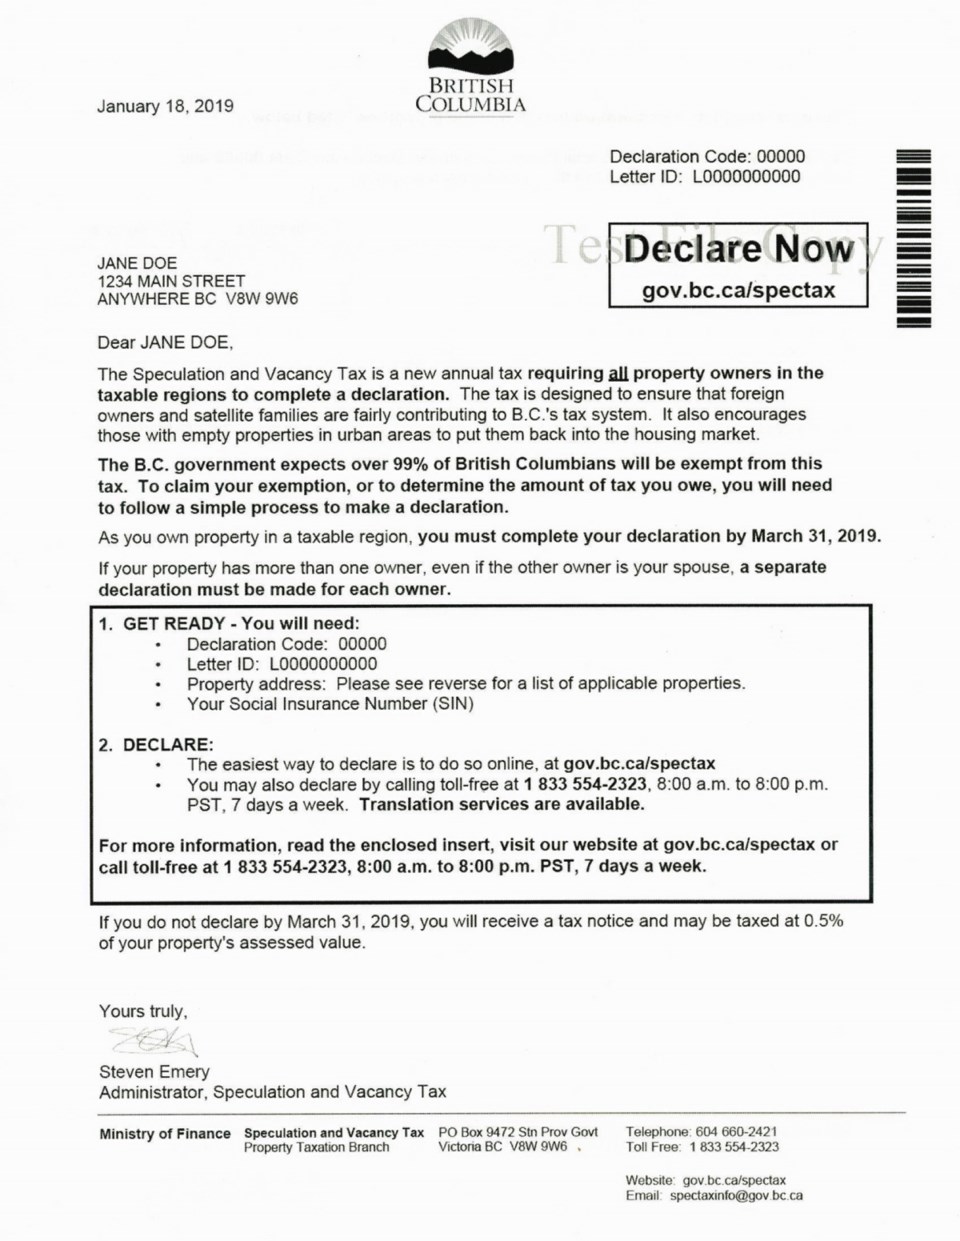 Sample of the Speculation and Vacancy Tax declaration form